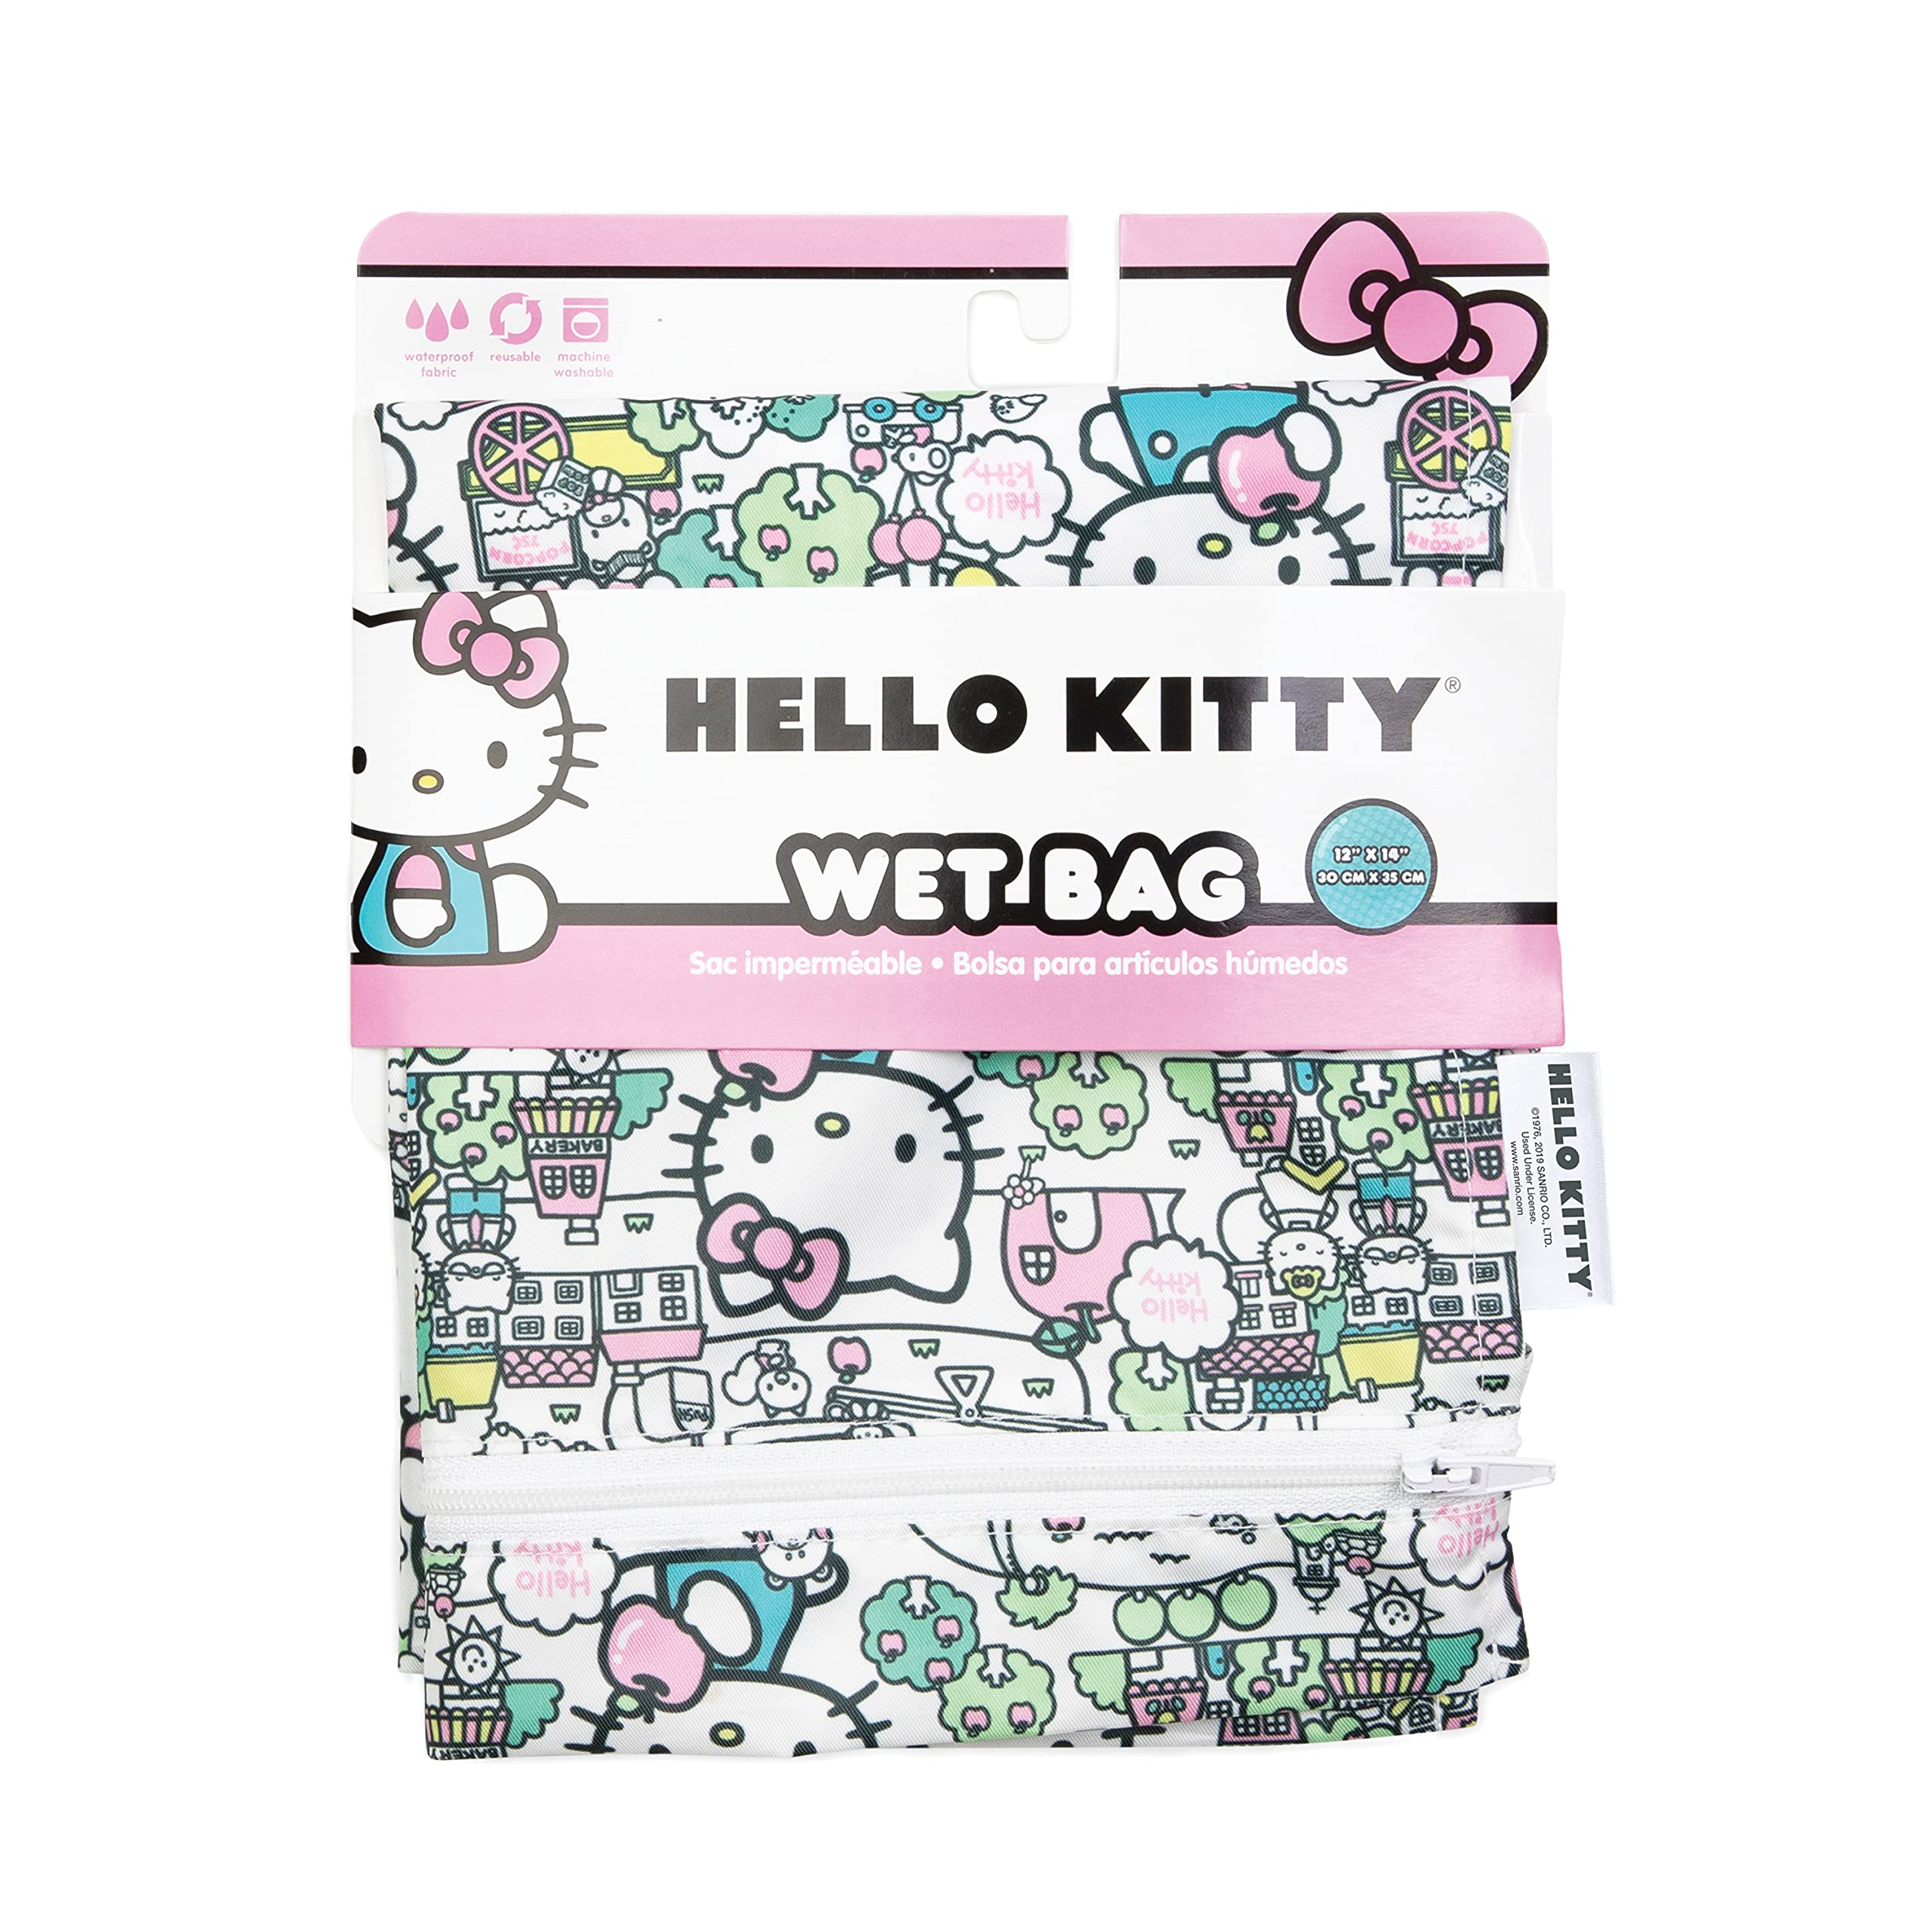 Bumkins Waterproof Wet Bags for Baby, Hello Kitty, Travel, Swimsuit, Cloth Diapers, Pump Parts, Gym Clothes, Toiletries, Strap to Stroller, Zipper Reusable Bag